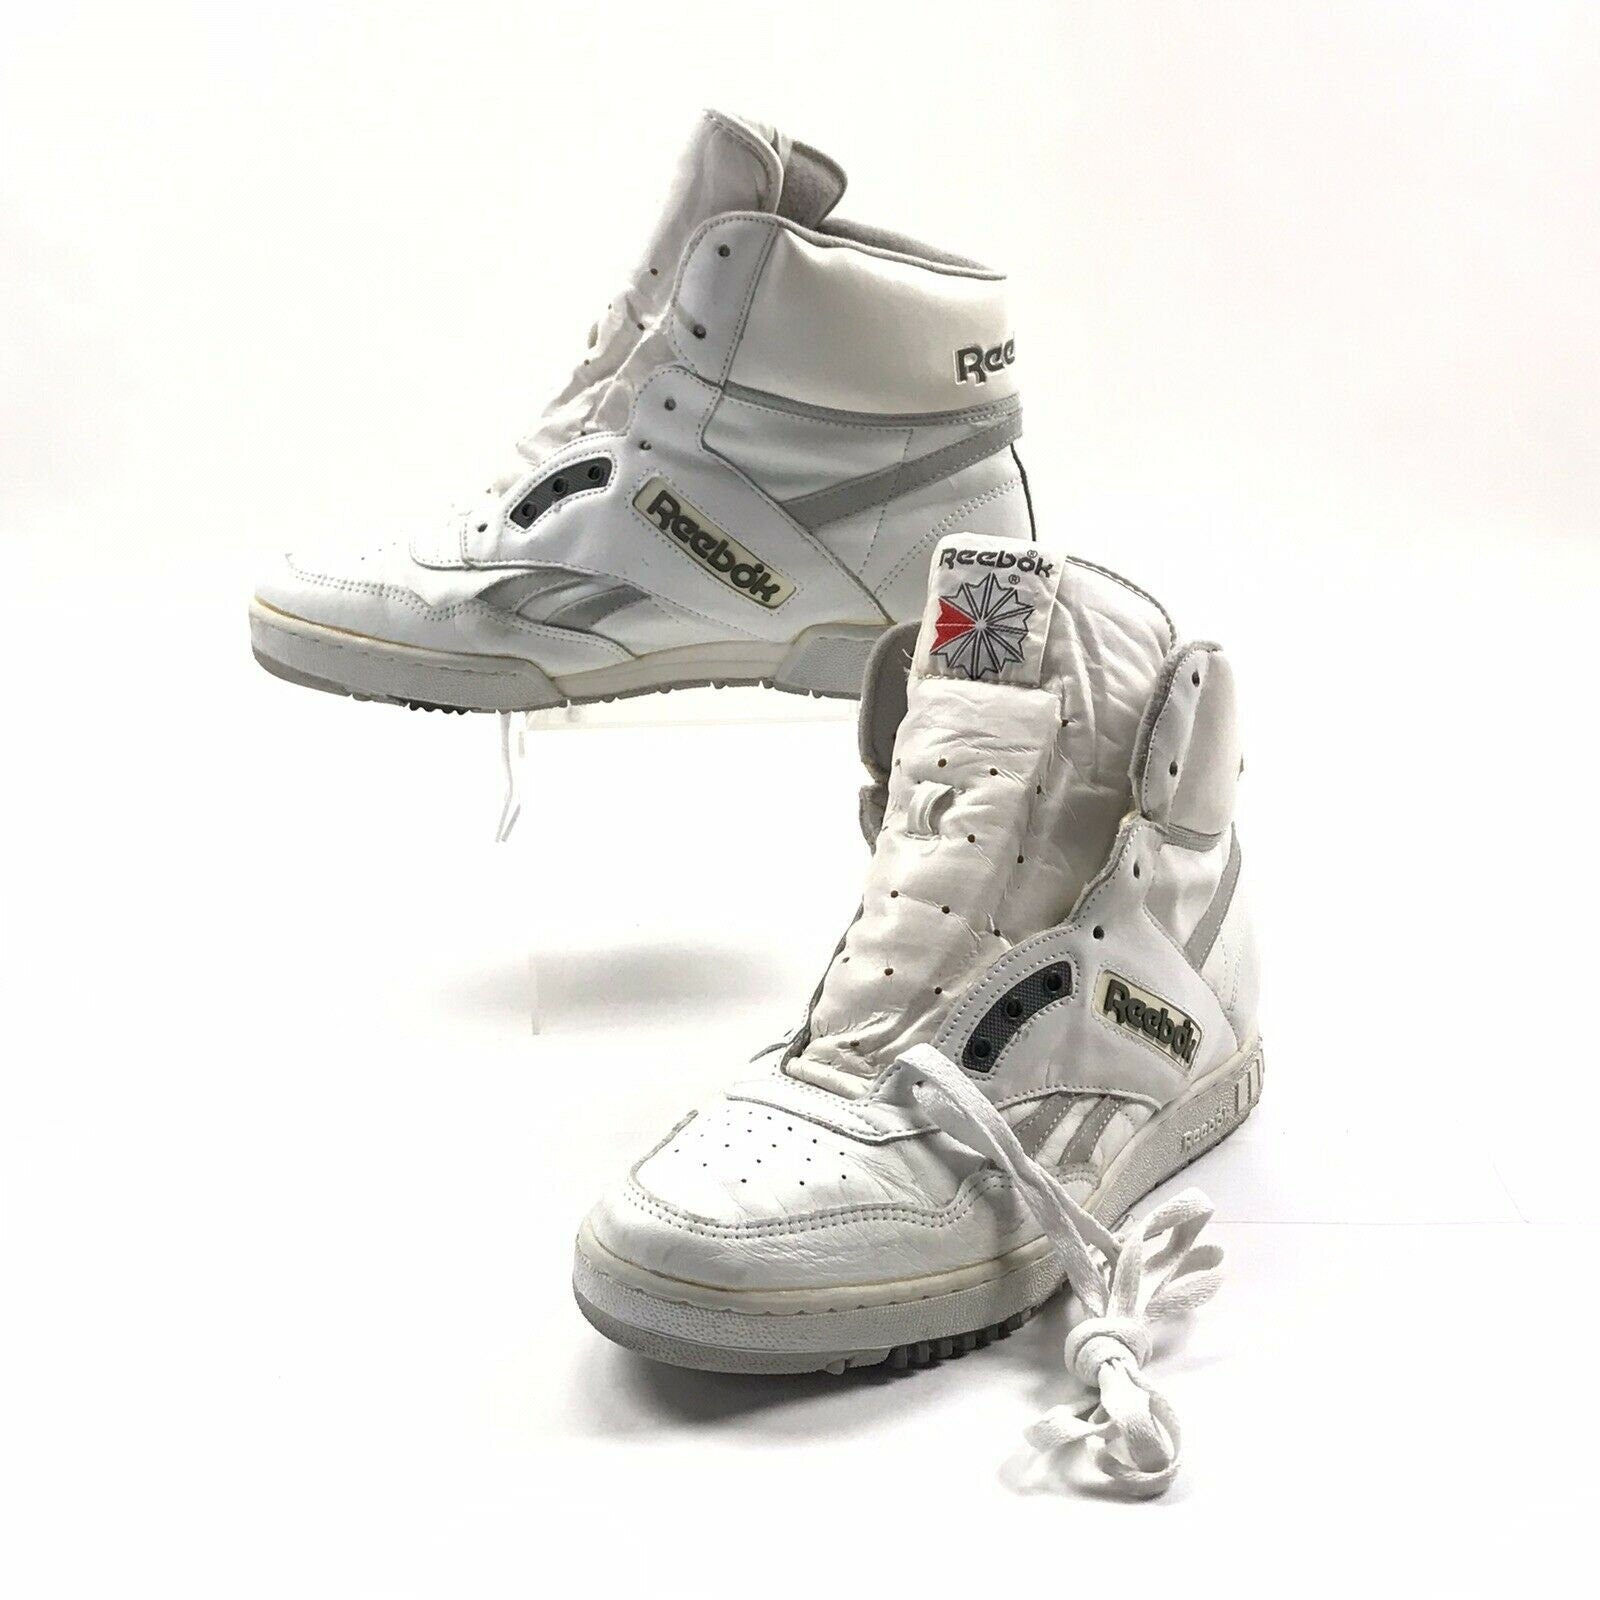 Vintage High Shoes White Gray Leather 80's Rare Unworn by Reebok | Shop THRILLING